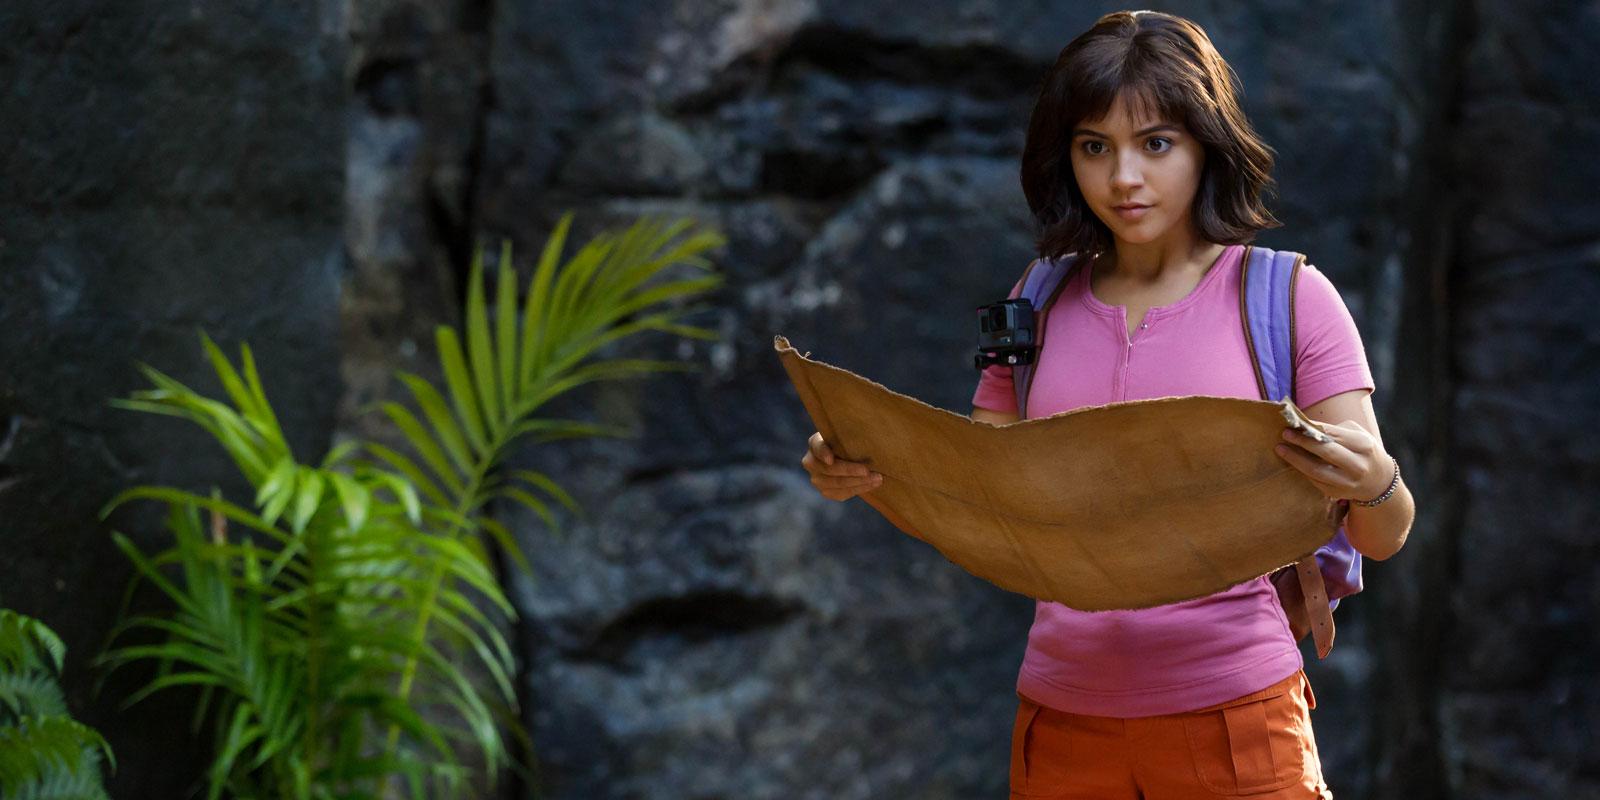 Teen Dora Still Sings 'The Backpack Song' and Talks to Her Monkey